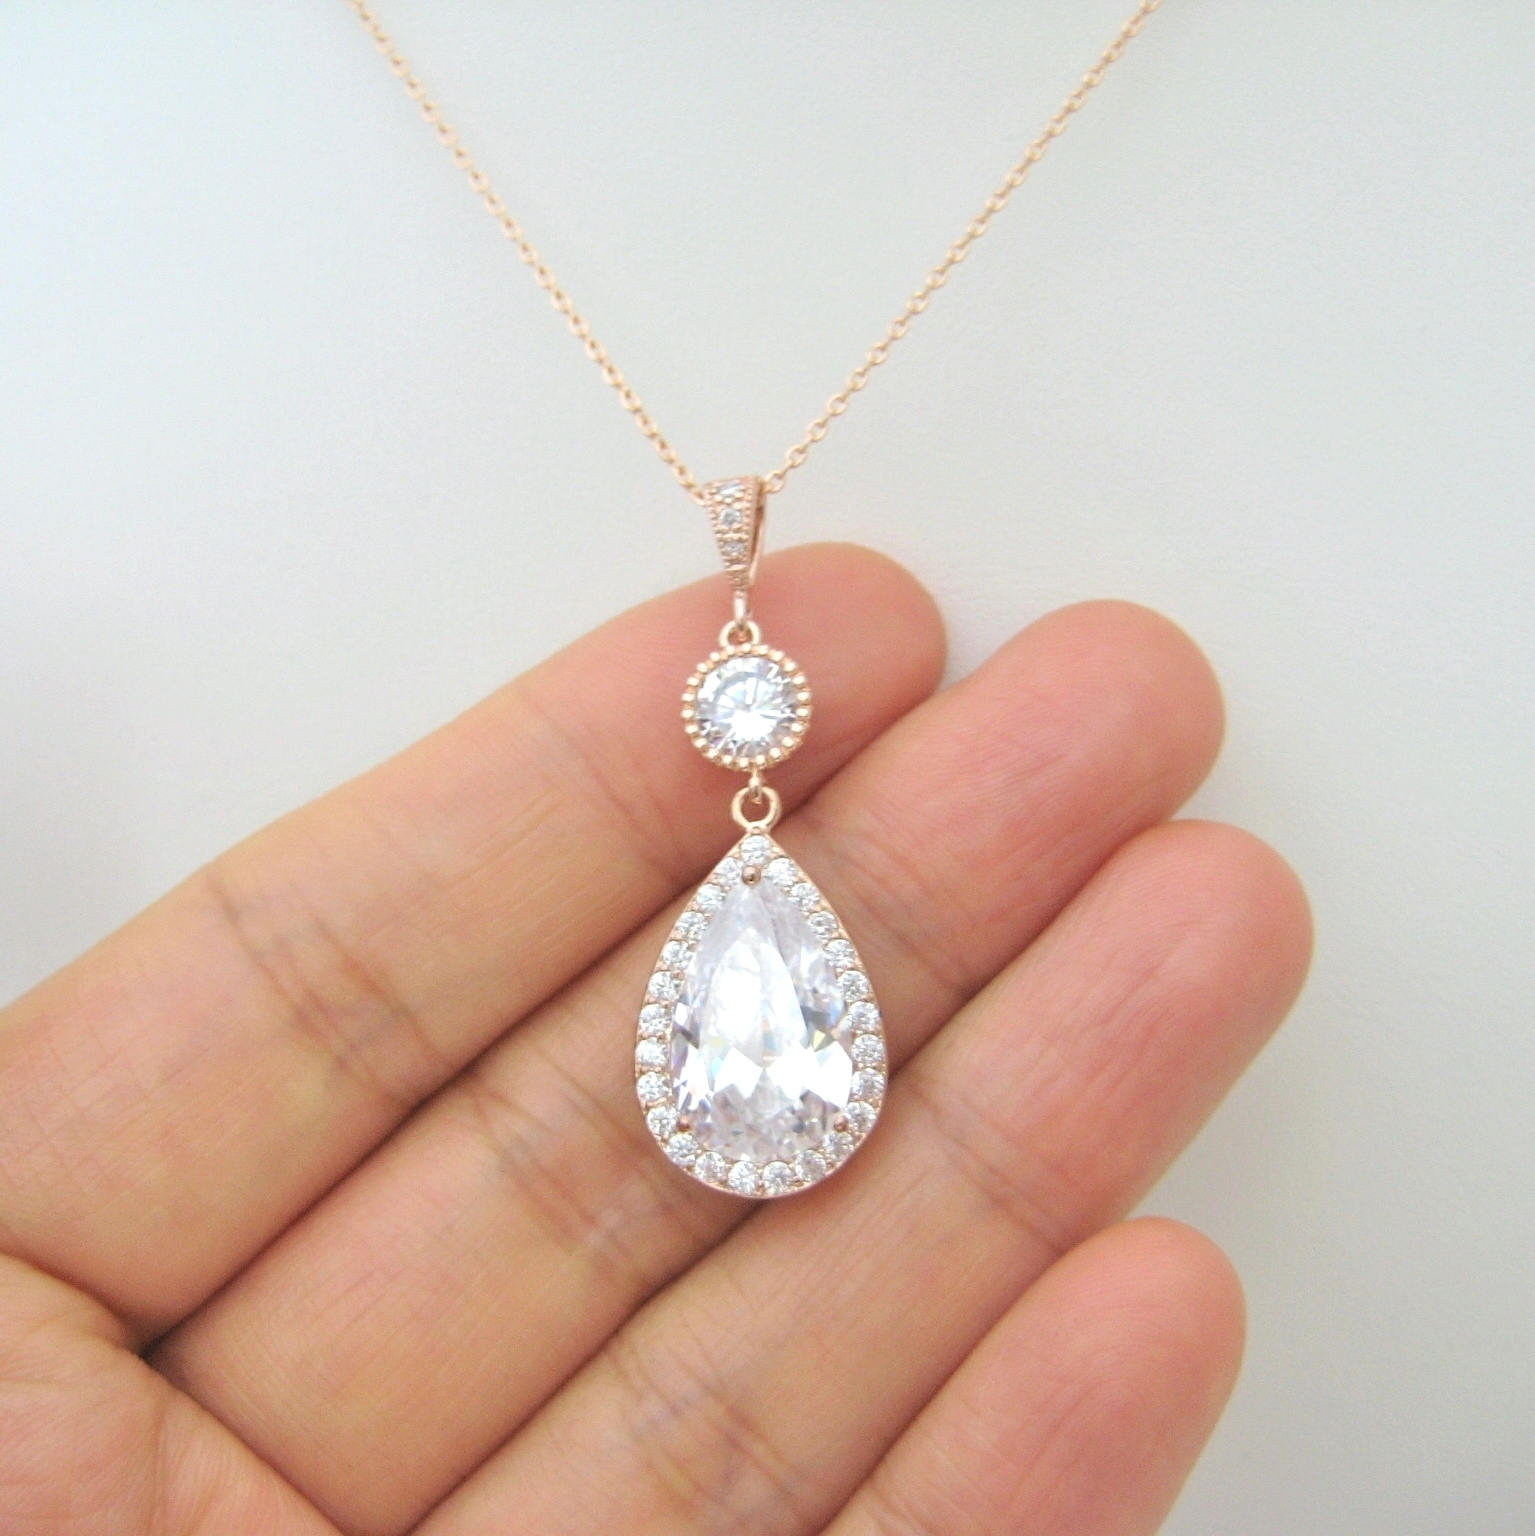 Bridal Crystal Necklace Gold Lux Large Clear Cubic Zirconia Teardrop Necklace Wedding Pendant Jewelry Sparky Necklace Bridesmaid Gift N010